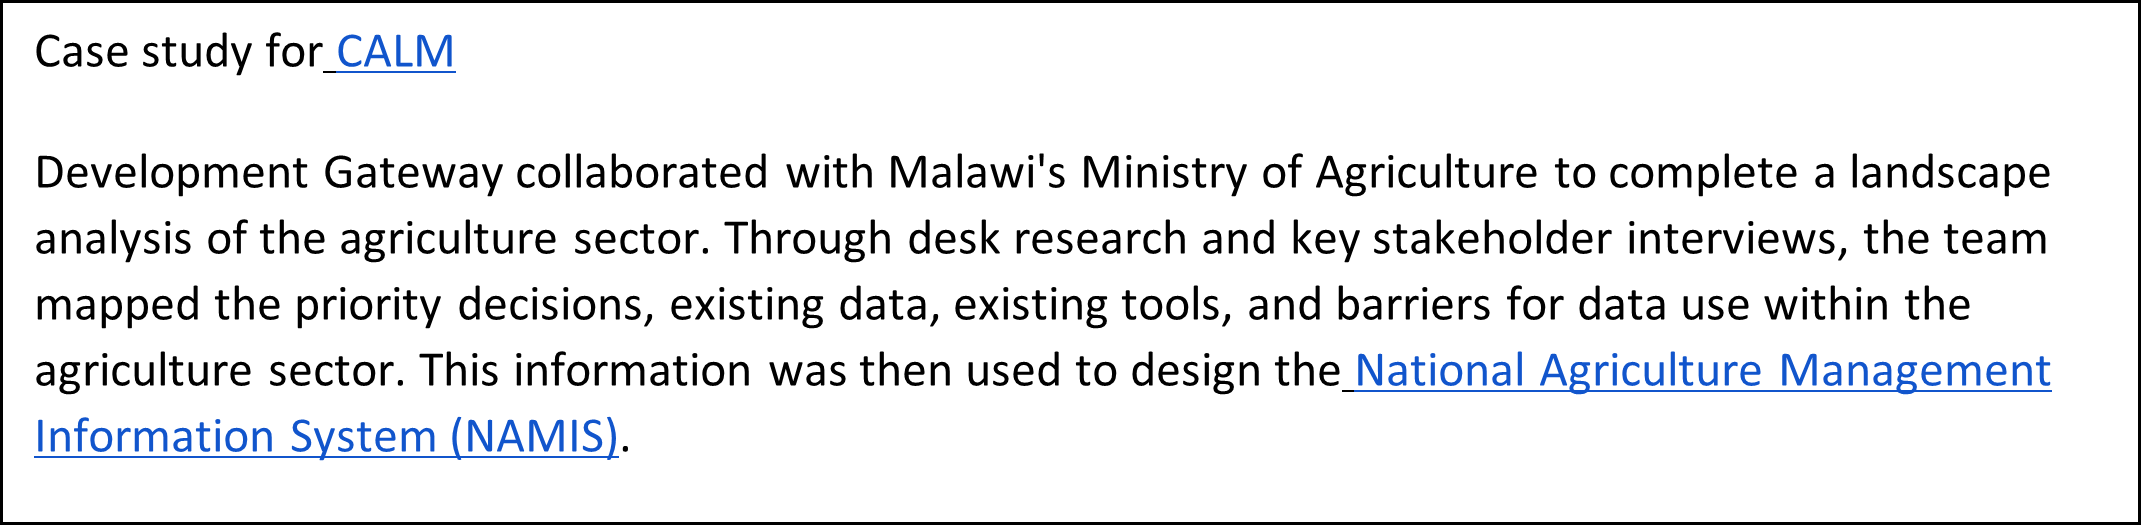 Development Gateway collaborated with Malawi's Ministry of Agriculture to complete a landscape analysis of the agriculture sector. Through desk research and key stakeholder interviews, the team mapped the priority decisions, existing data, existing tools, and barriers for data use within the agriculture sector. This information was then used to design the National Agriculture Management Information System (NAMIS).